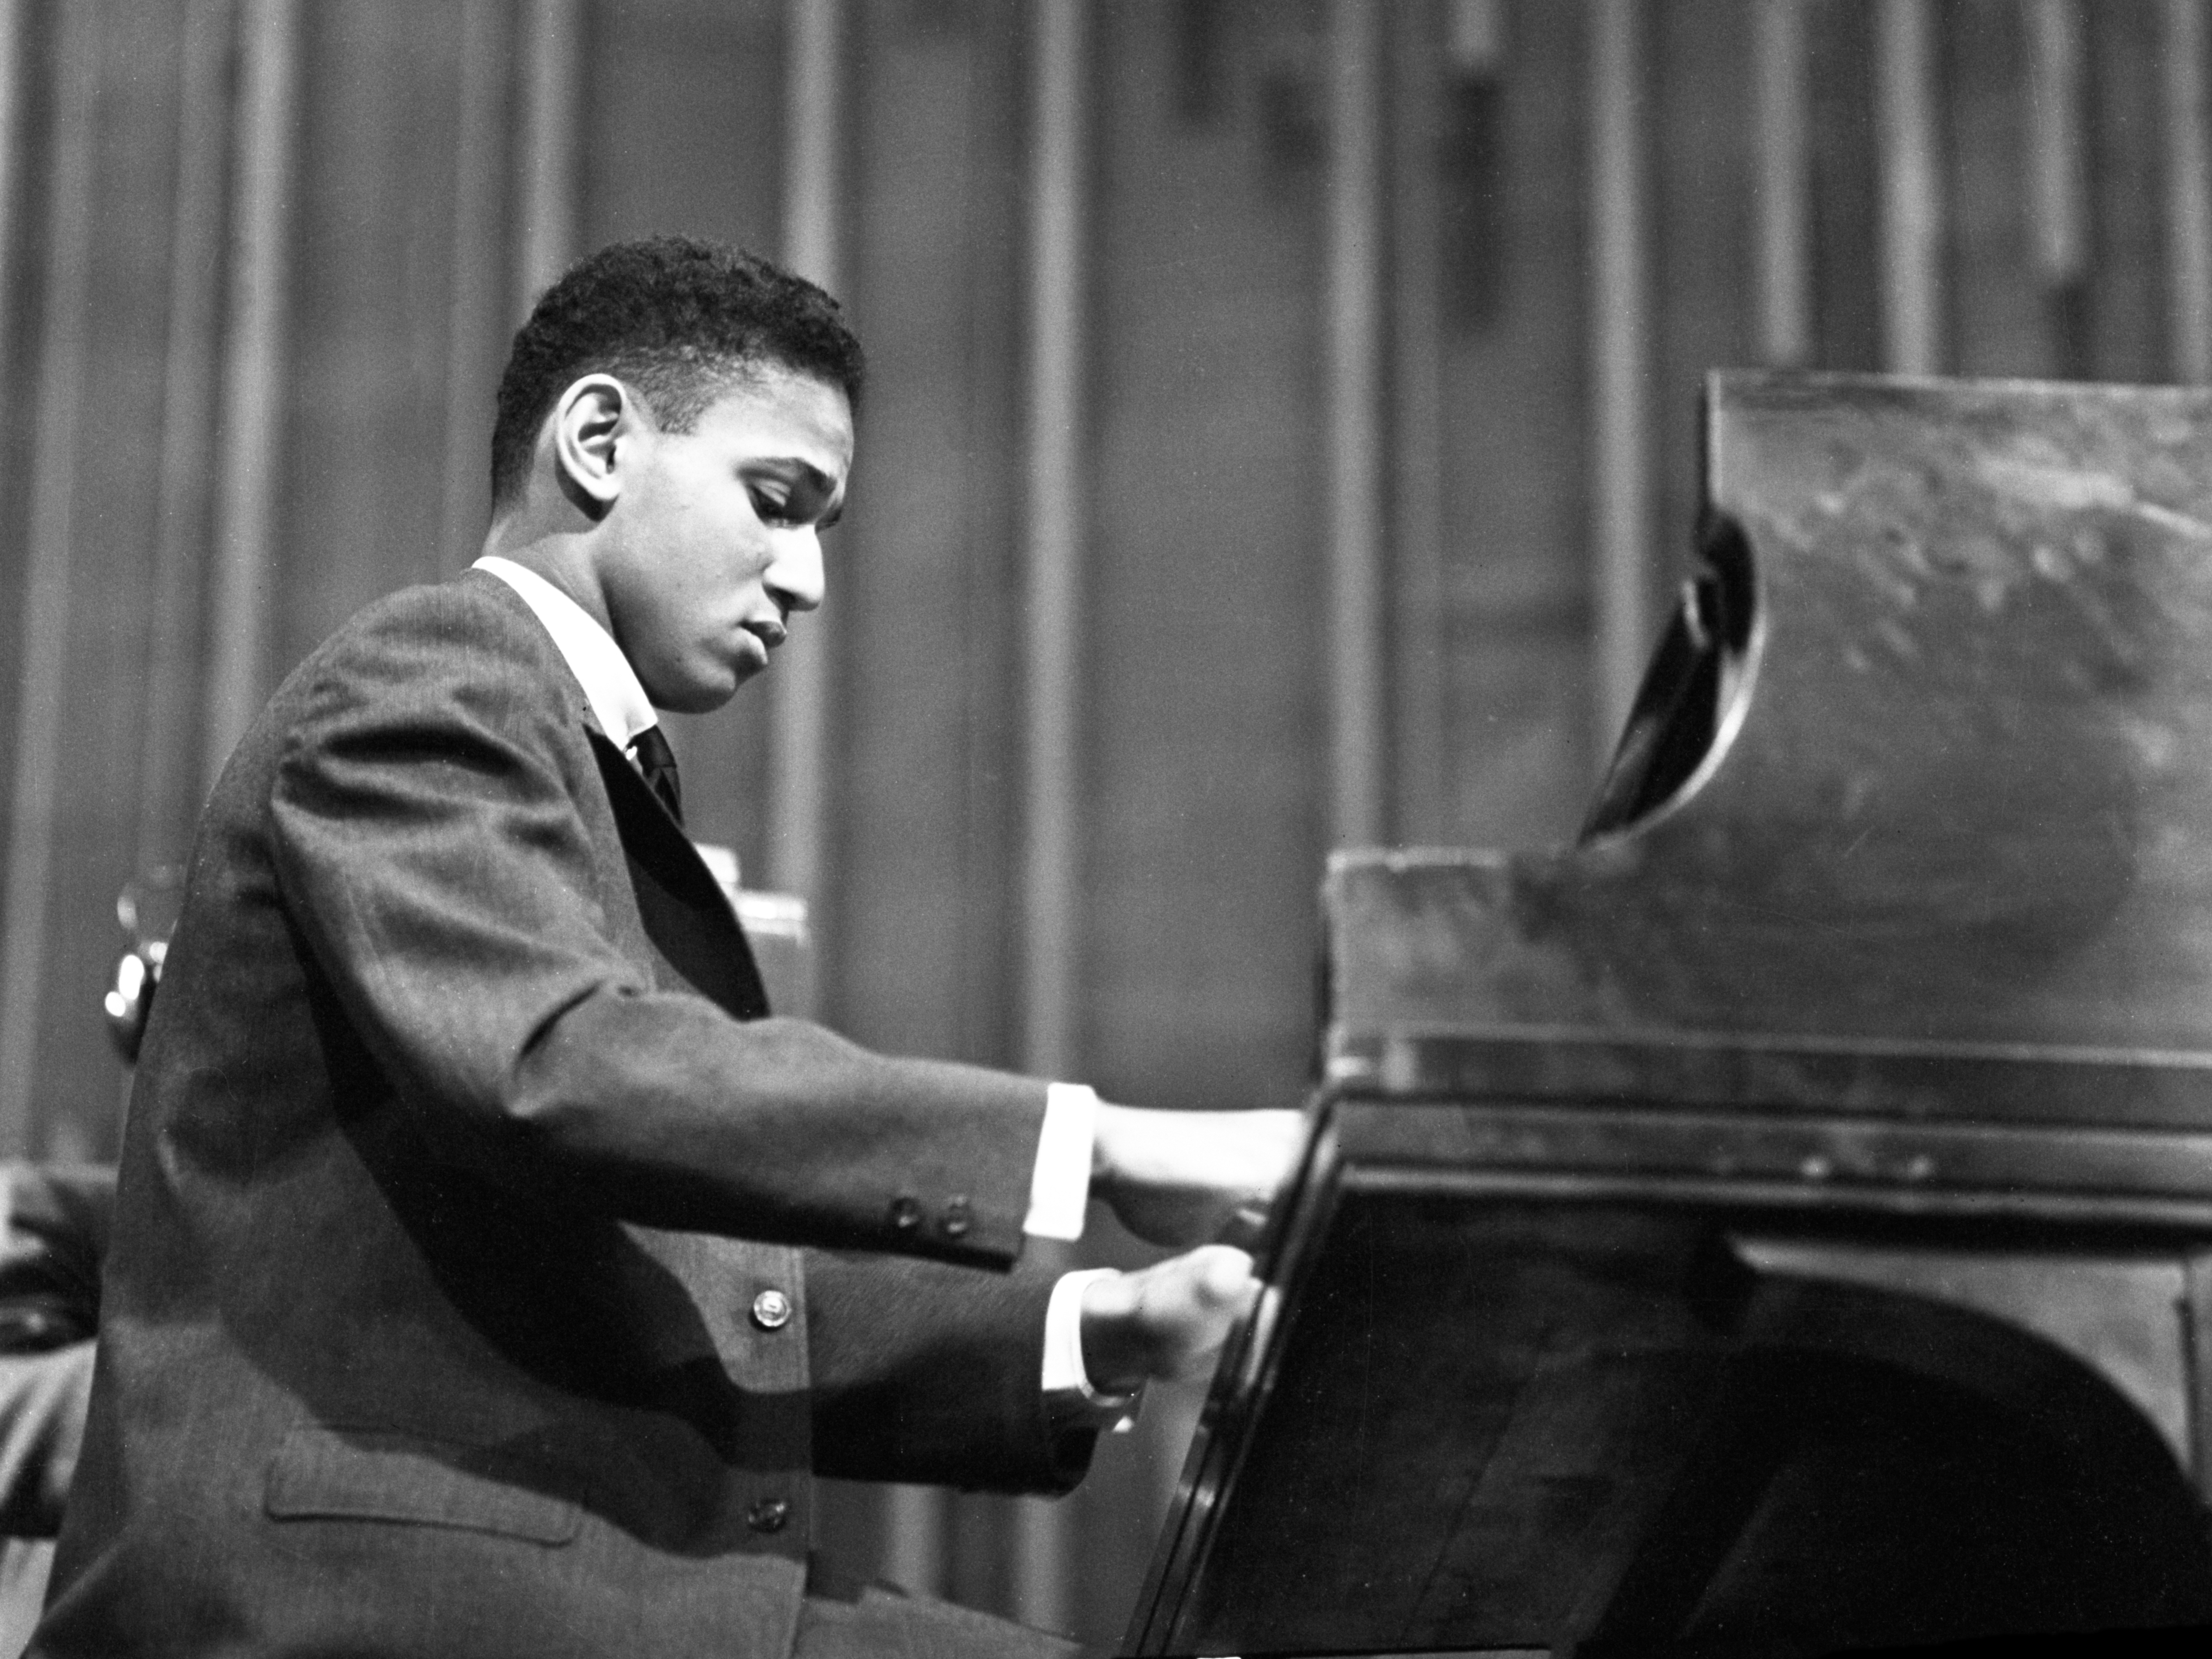 Pianist André Watts, age 16, in rehearsal with the New York Philharmonic for one of Leonard Bernstein's Young People's Concerts.